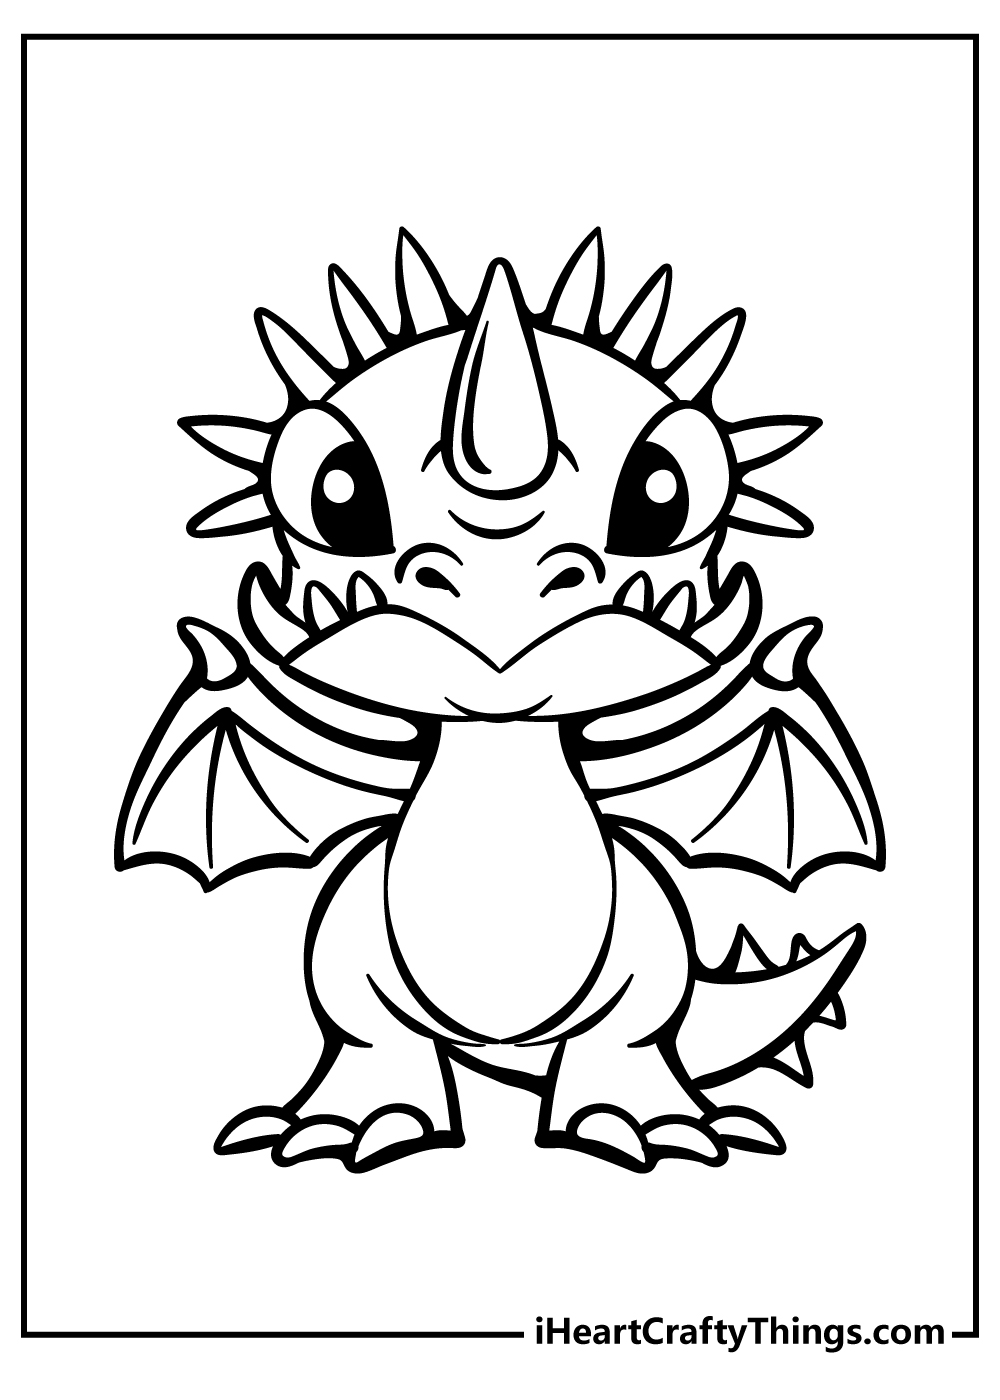 How To Train Your Dragon Coloring Pages for adults free printable